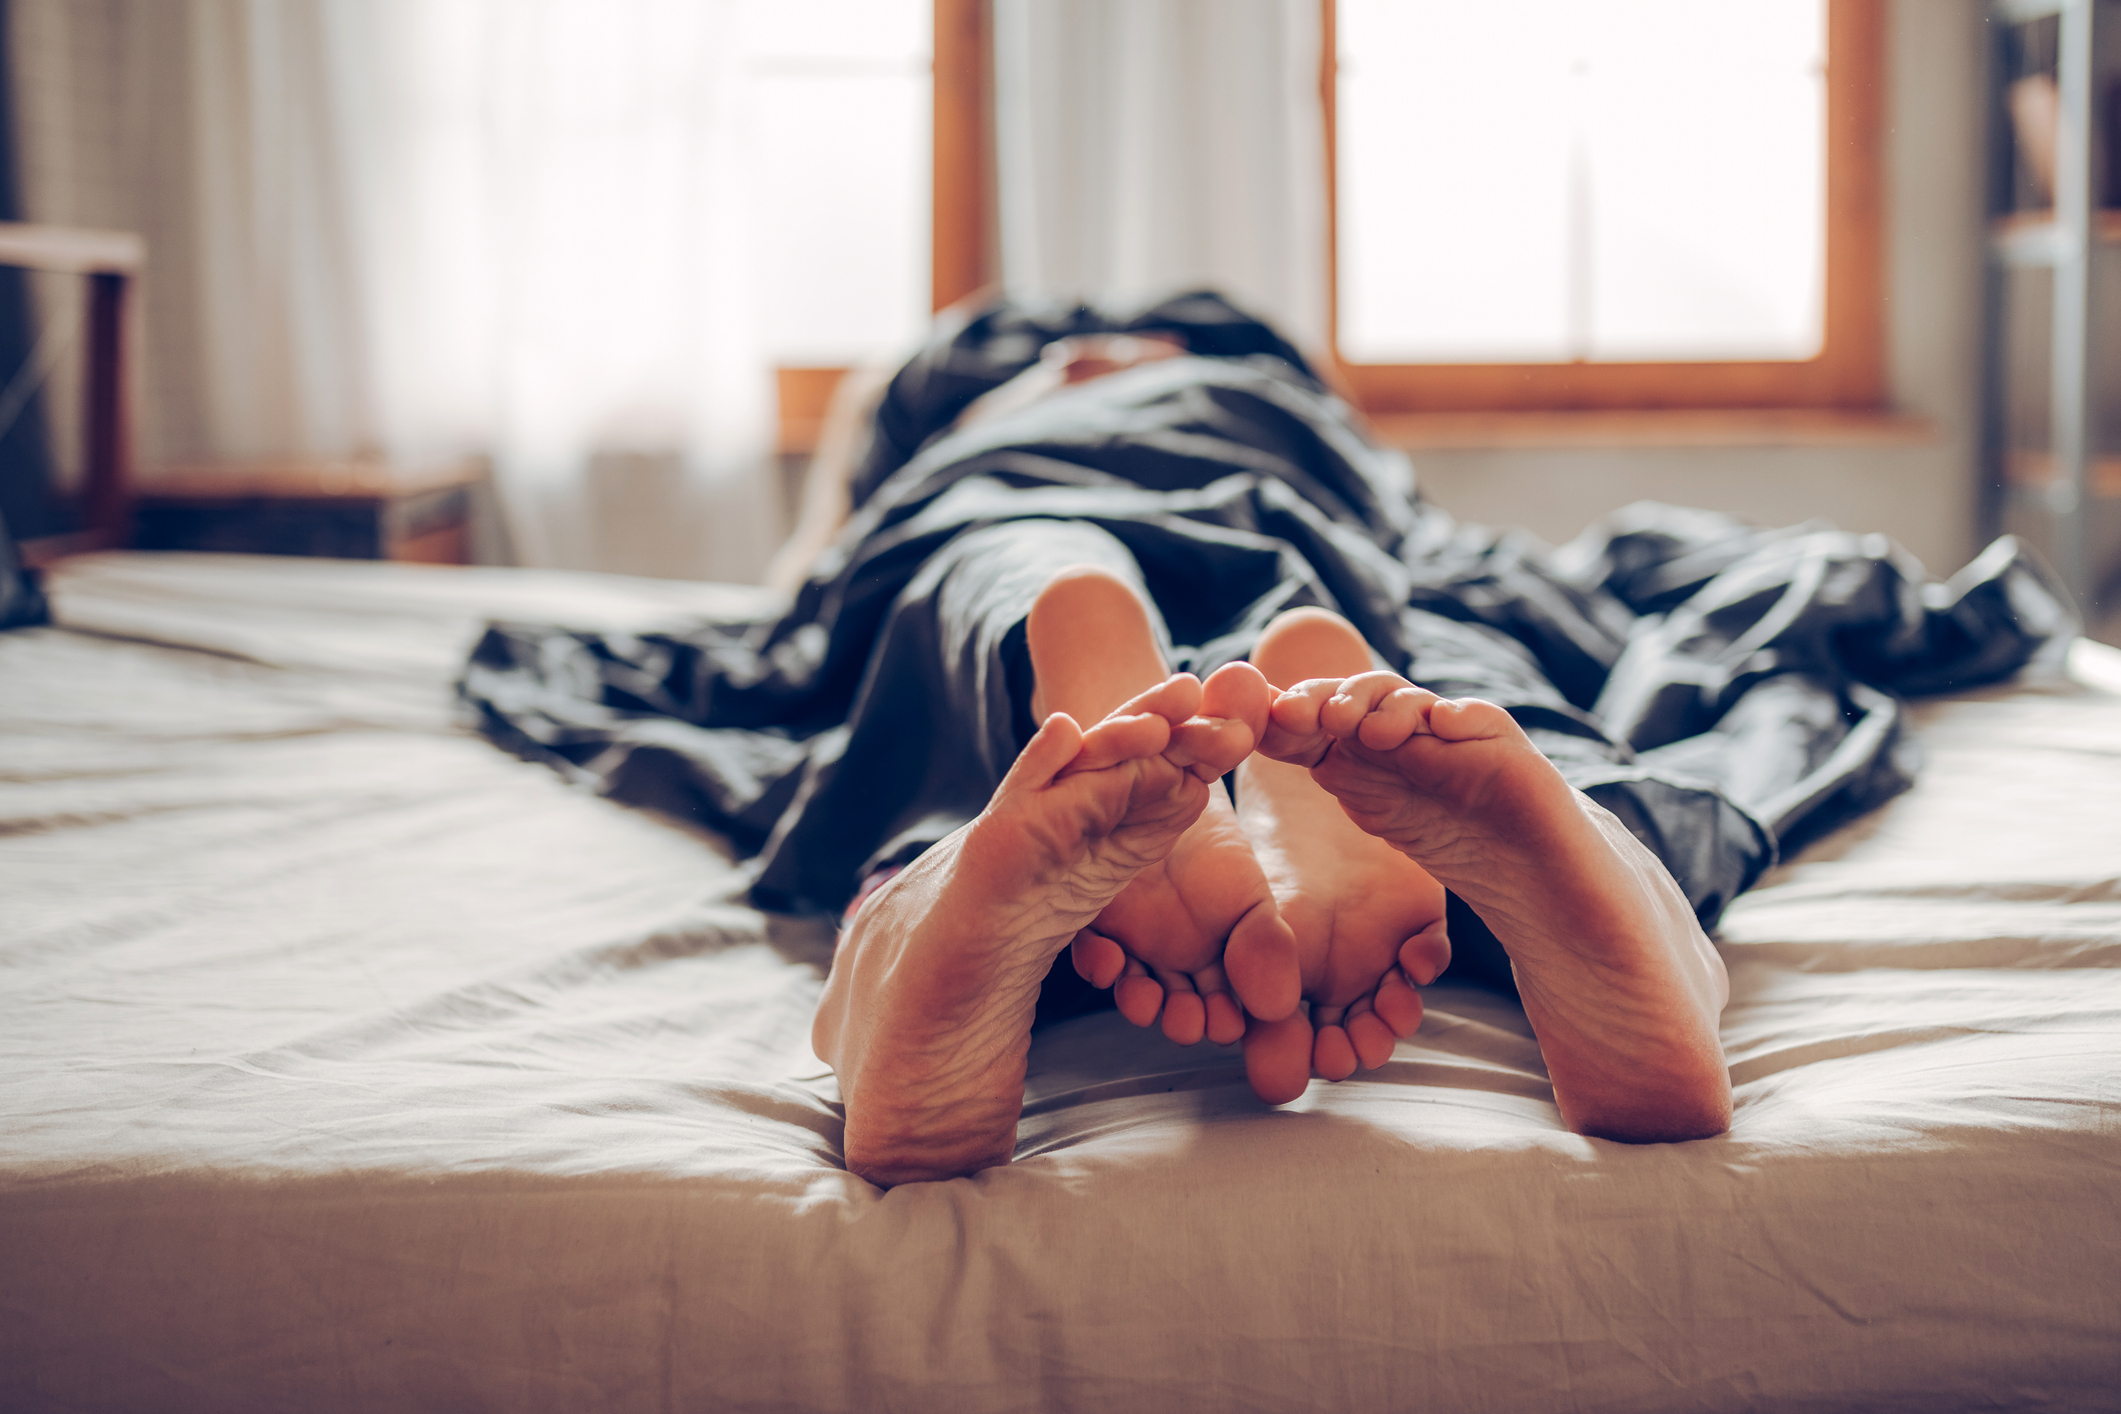 Cuddling in bed may not set the right level of boundaries for a FWB relationship.